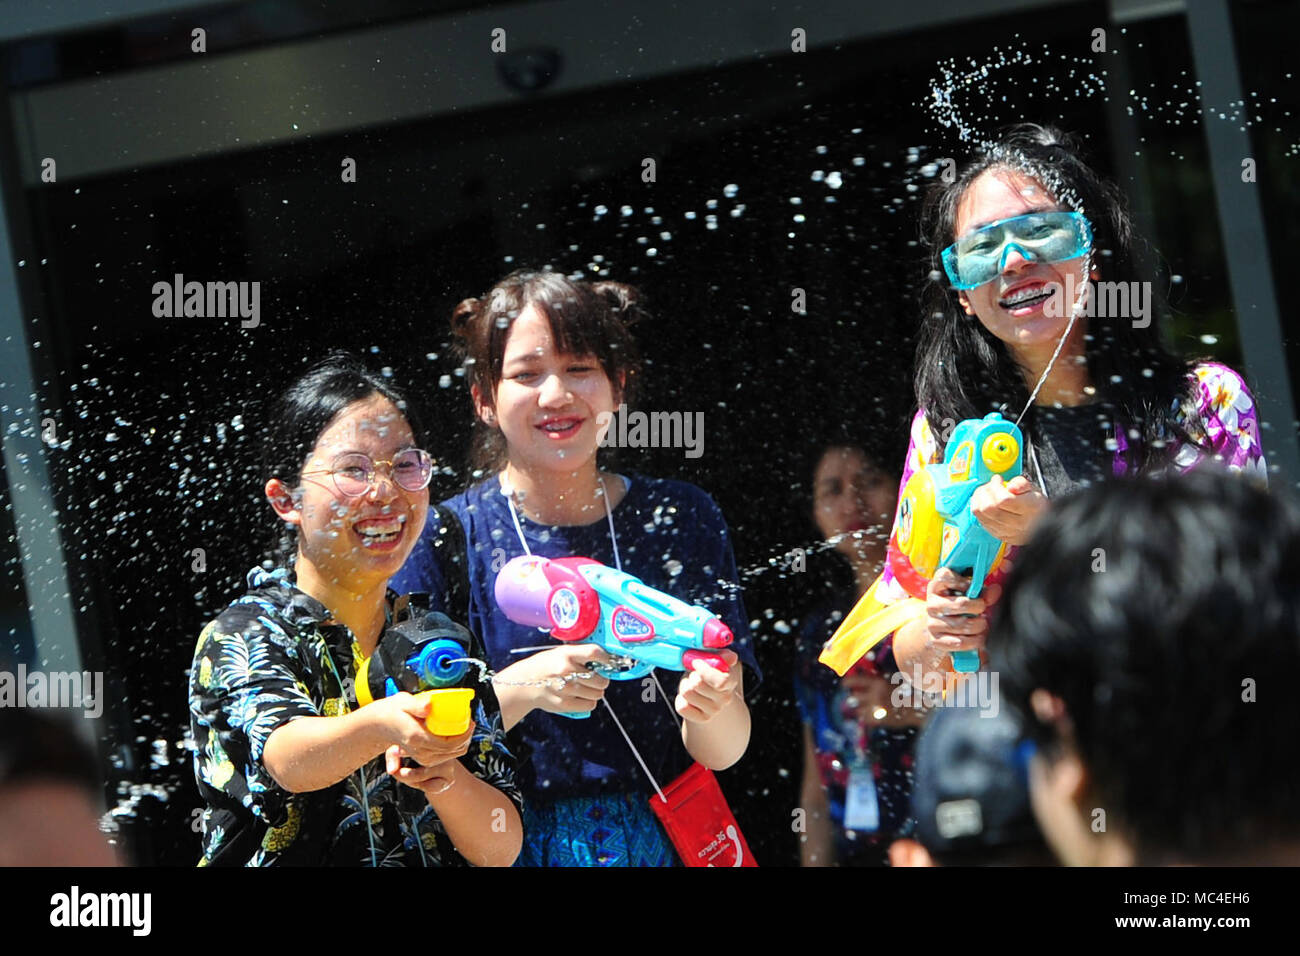 Bangkok, Thailand. 13th Apr, 2018. People take part in water gun battles during celebrations for Songkran Festival, Thailand's traditional New Year Festival, in Siam shopping district of Bangkok, Thailand, April 13, 2018. Credit: Rachen Sageamsak/Xinhua/Alamy Live News Stock Photo